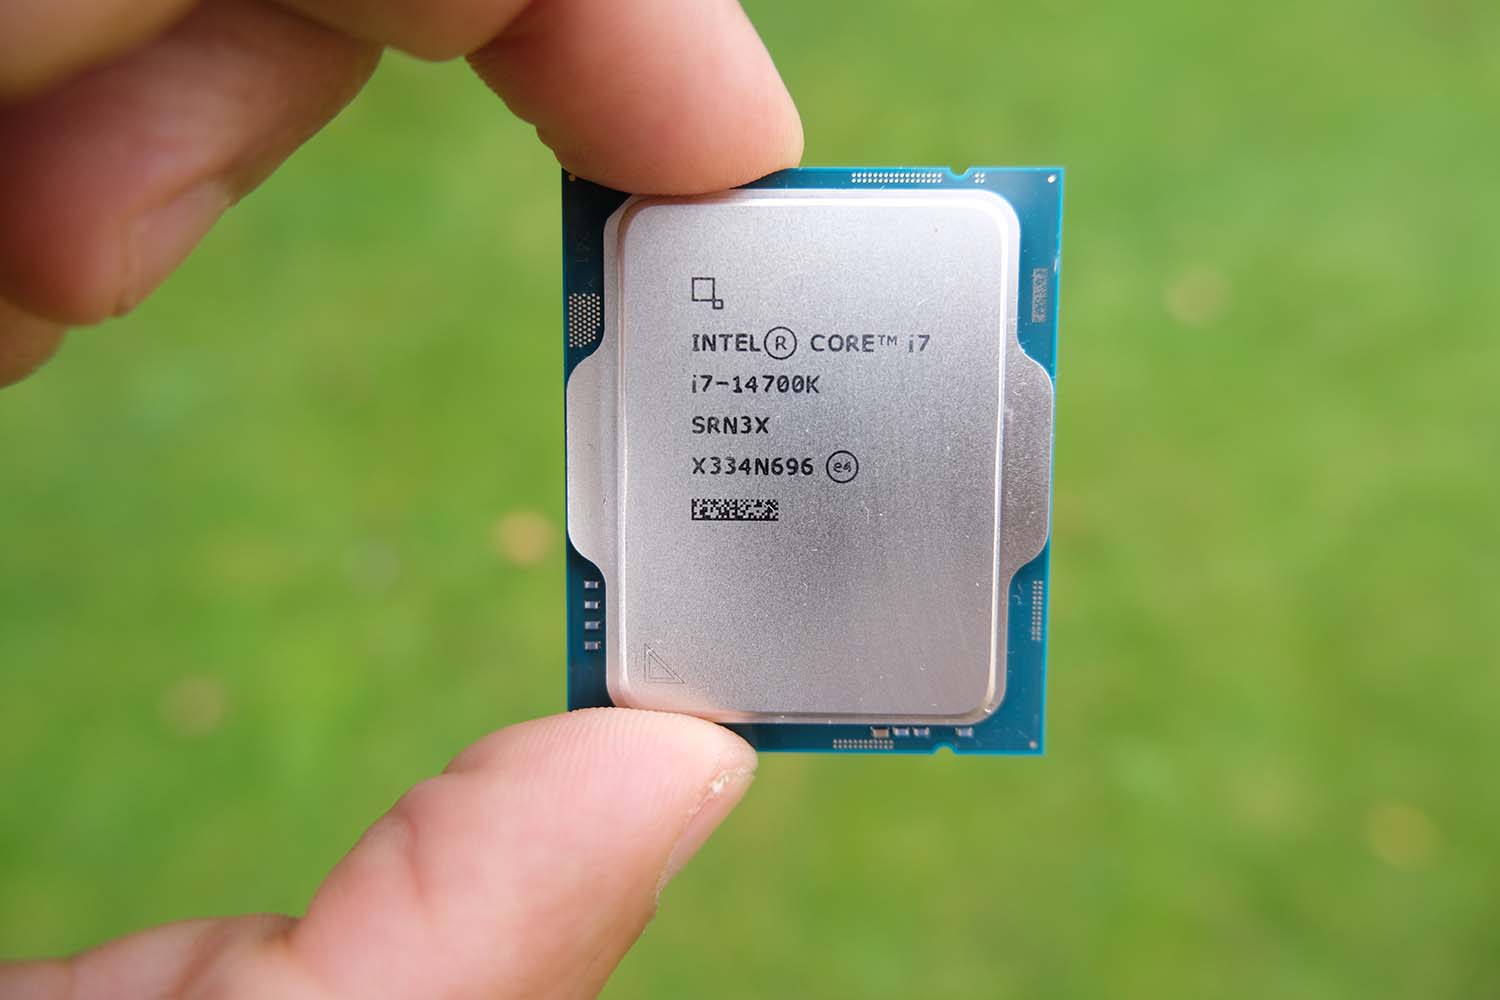 All of the Intel Core i7-14700K's power at our fingertips, check out the new CPU.